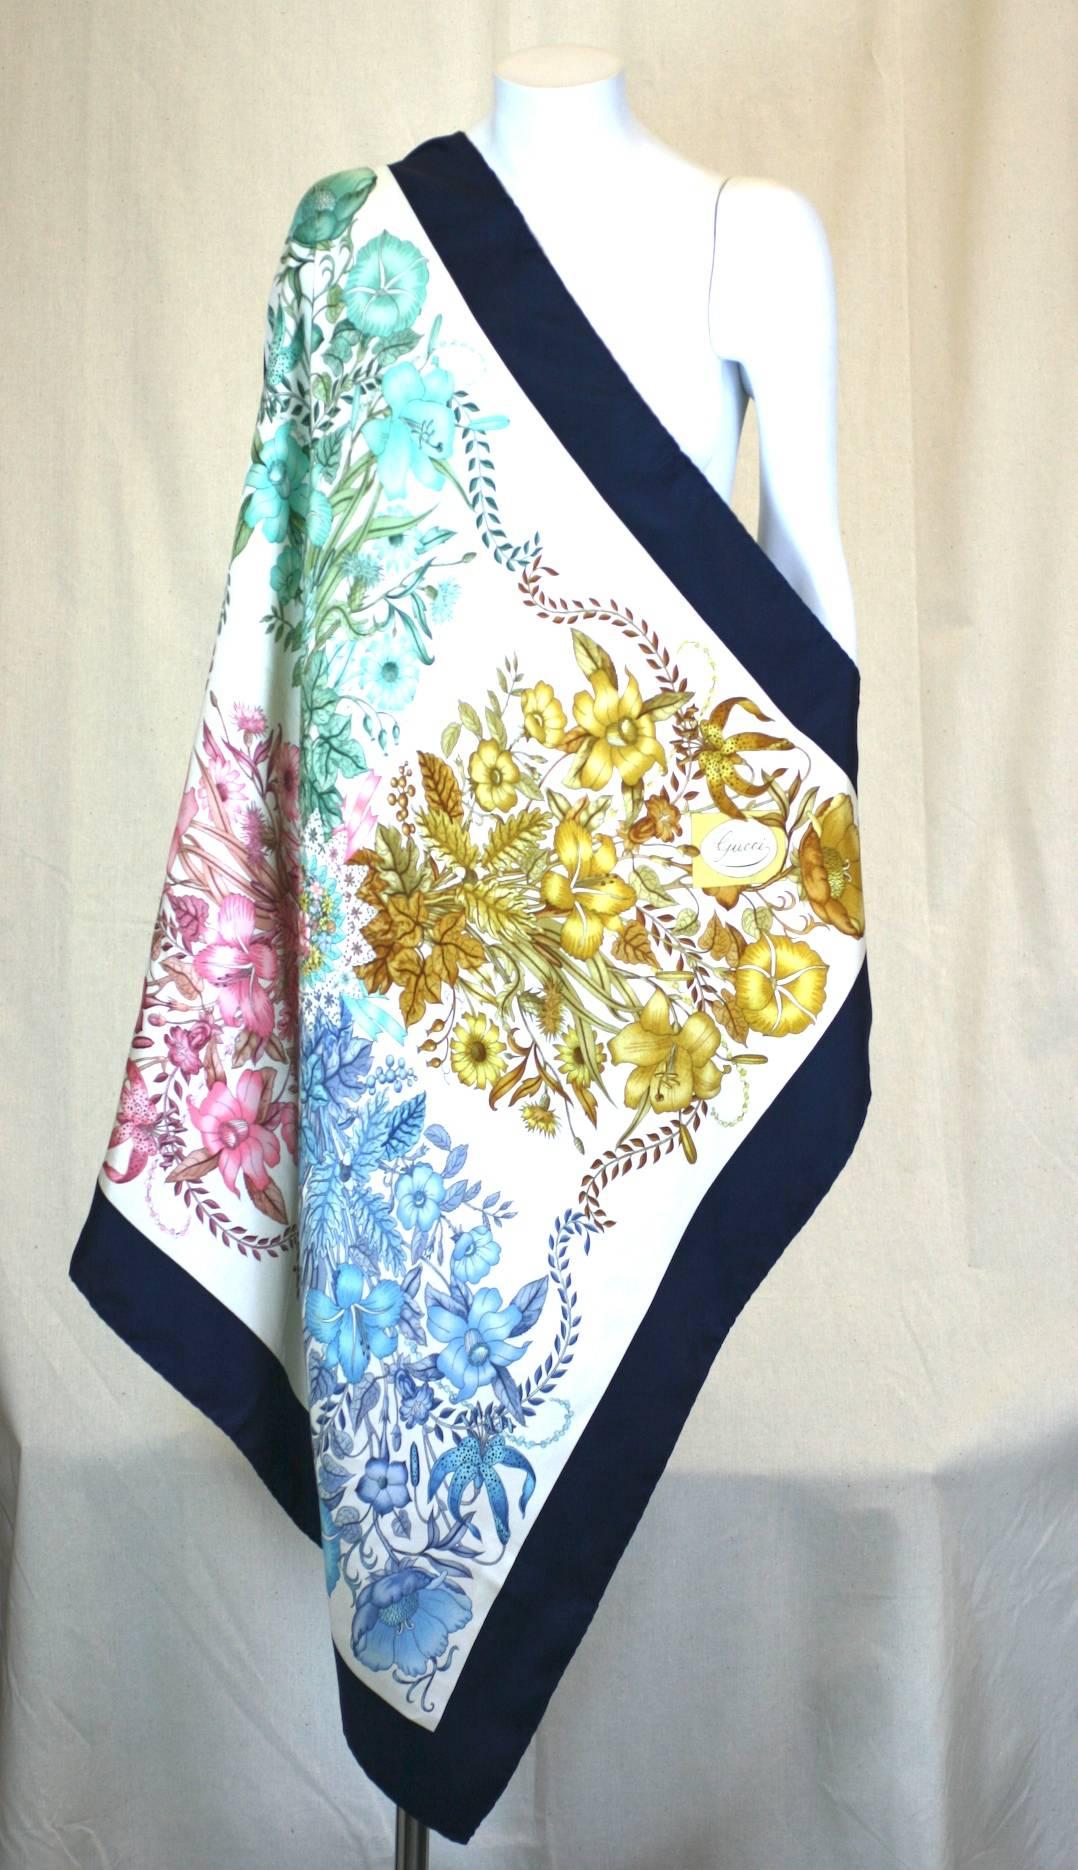 Gucci Floral Bouquet Scarf in silk twill. A series of similar bouquets in different tones are centered within a darker border. Excellent condition. 1990's Italy.
33